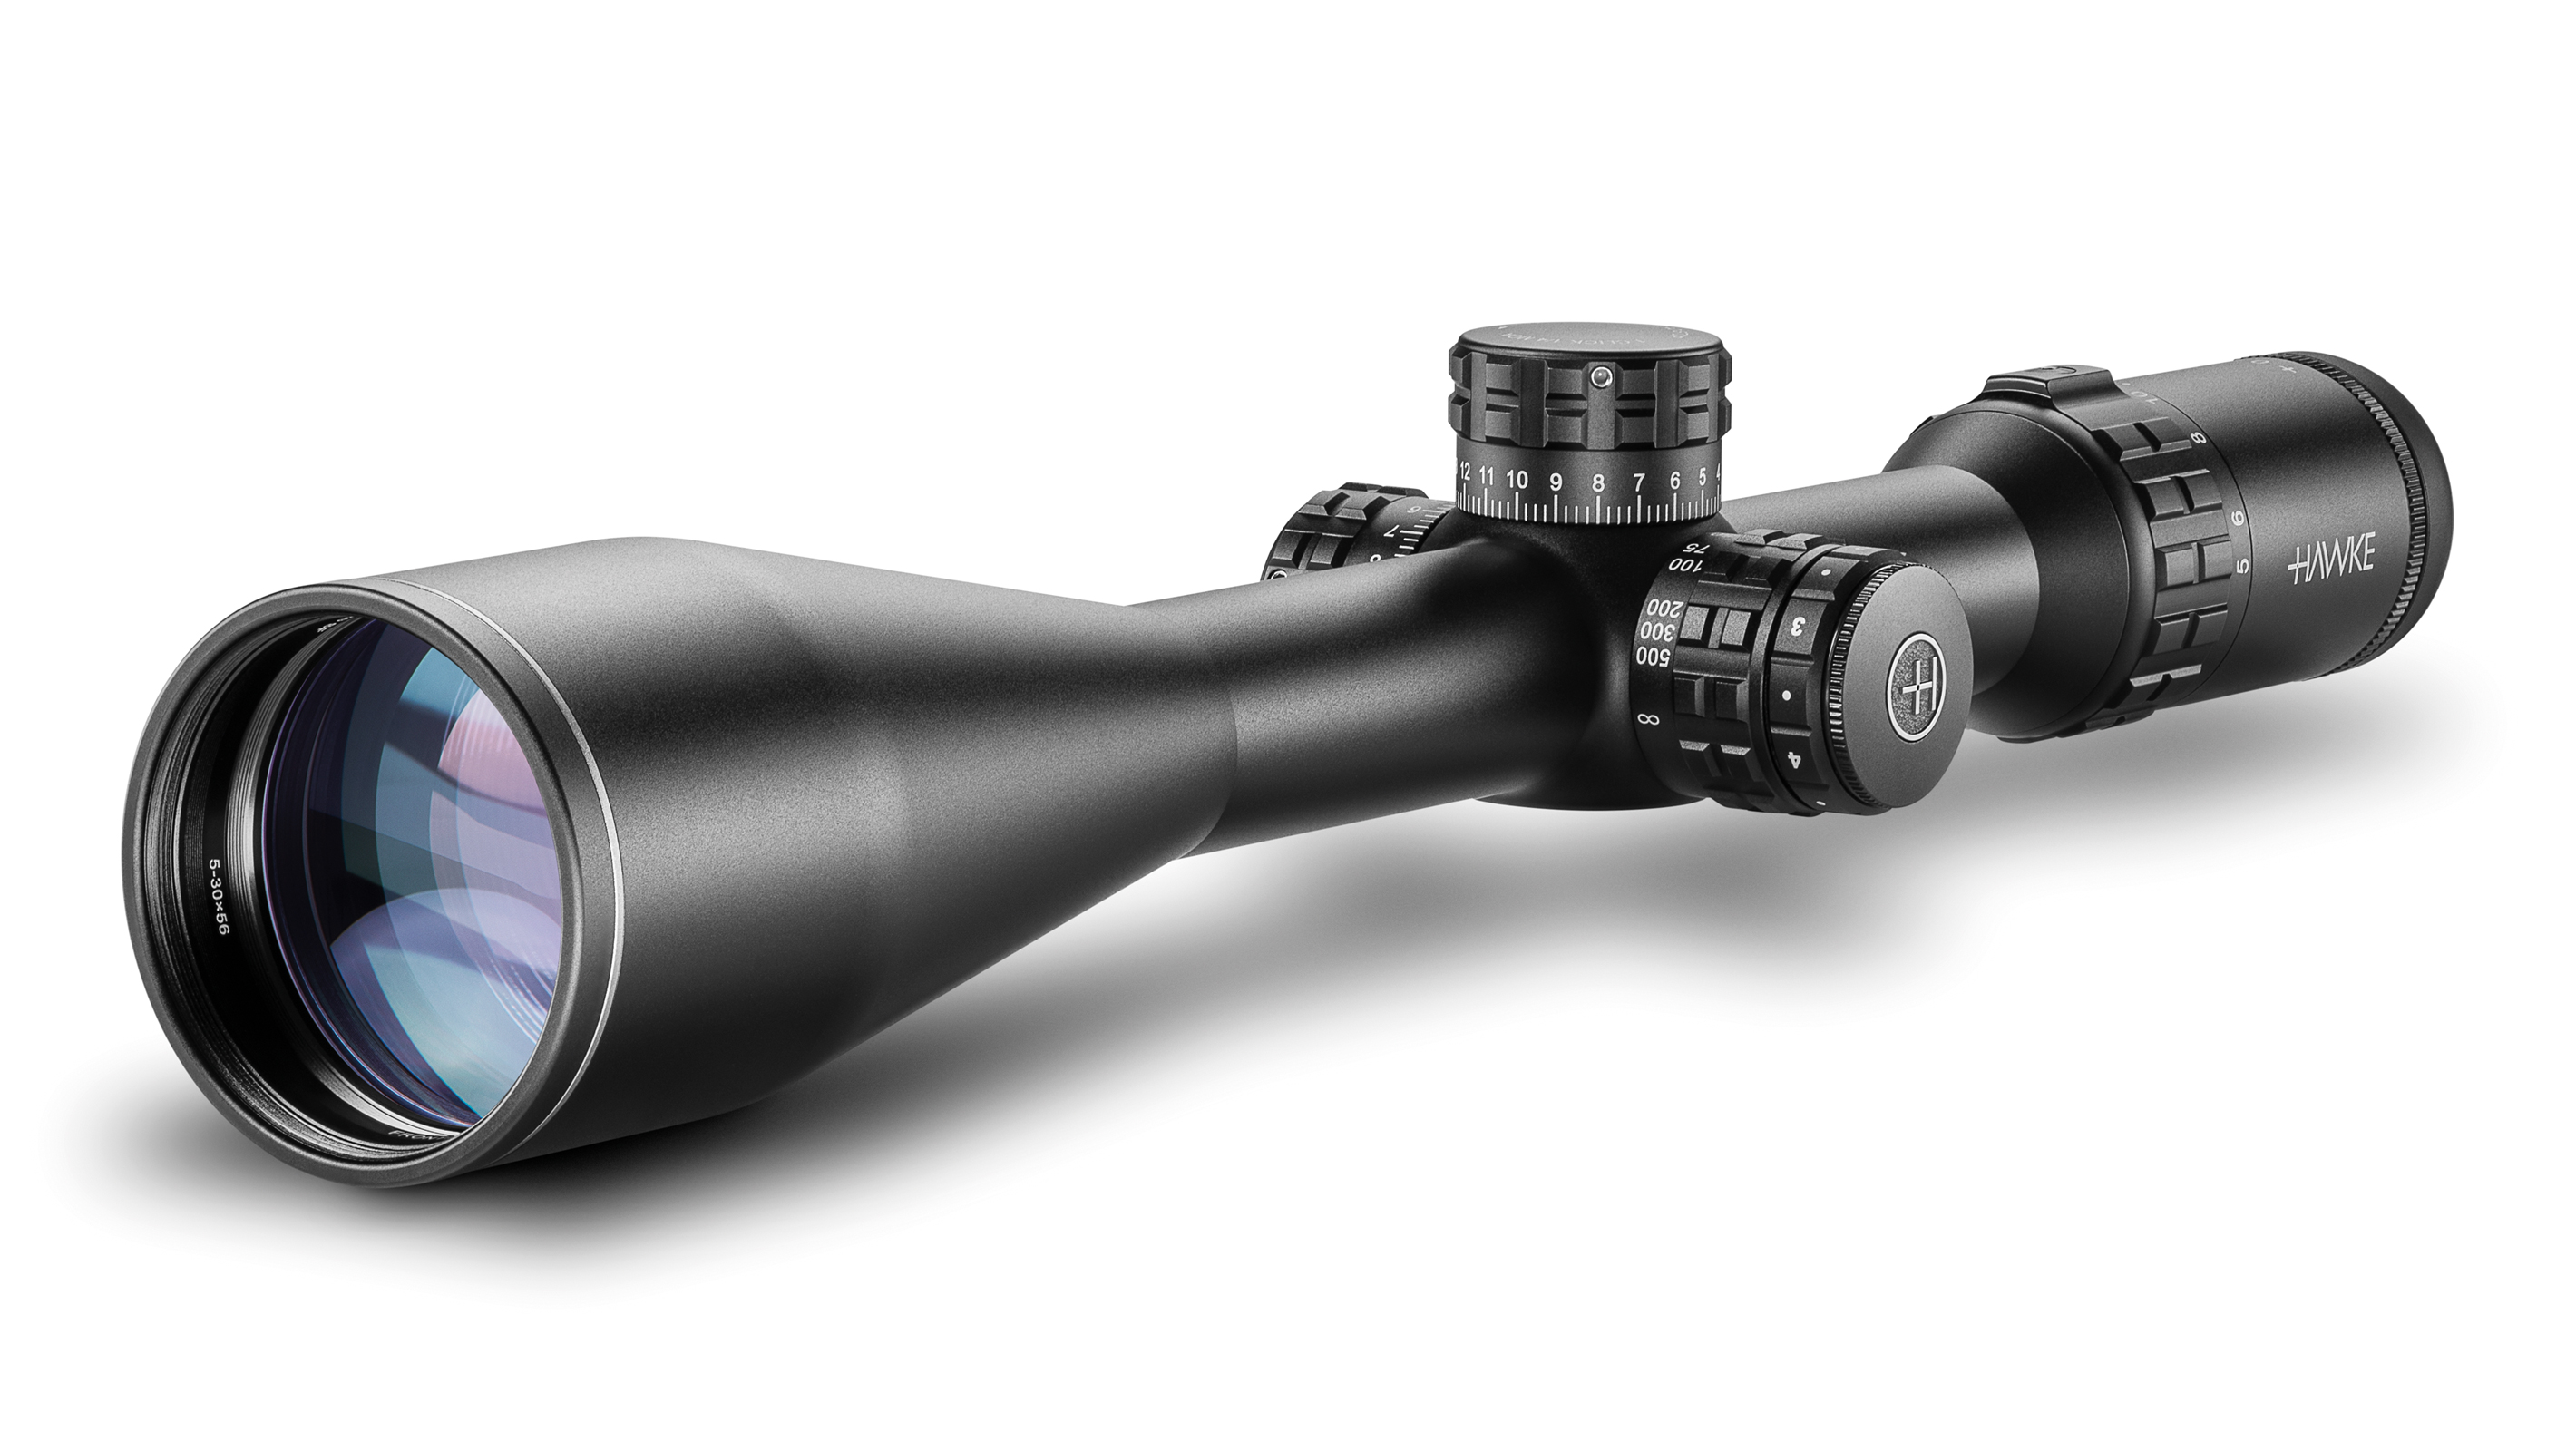 Objective End View Of The Hawke Frontier 30 SF 5-30x56 LR Dot Rifle Scope